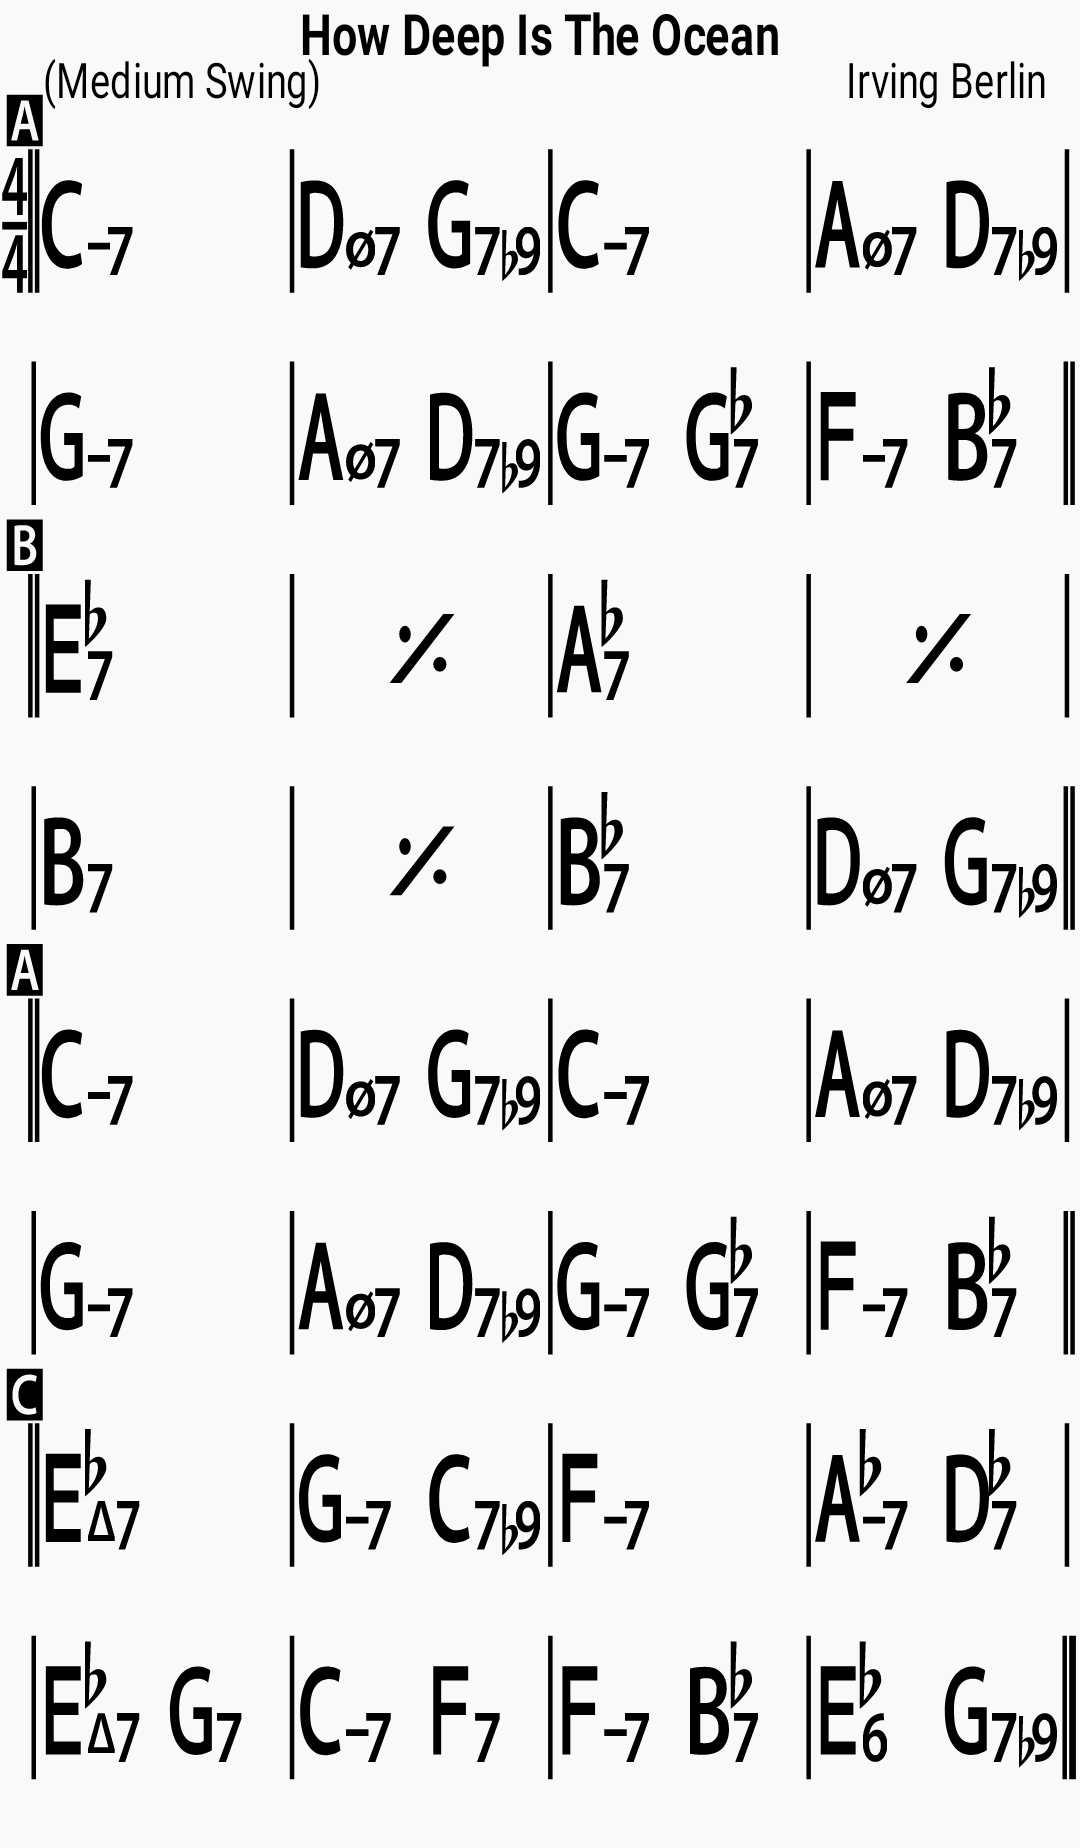 Chord chart for the jazz standard How Deep Is The Ocean